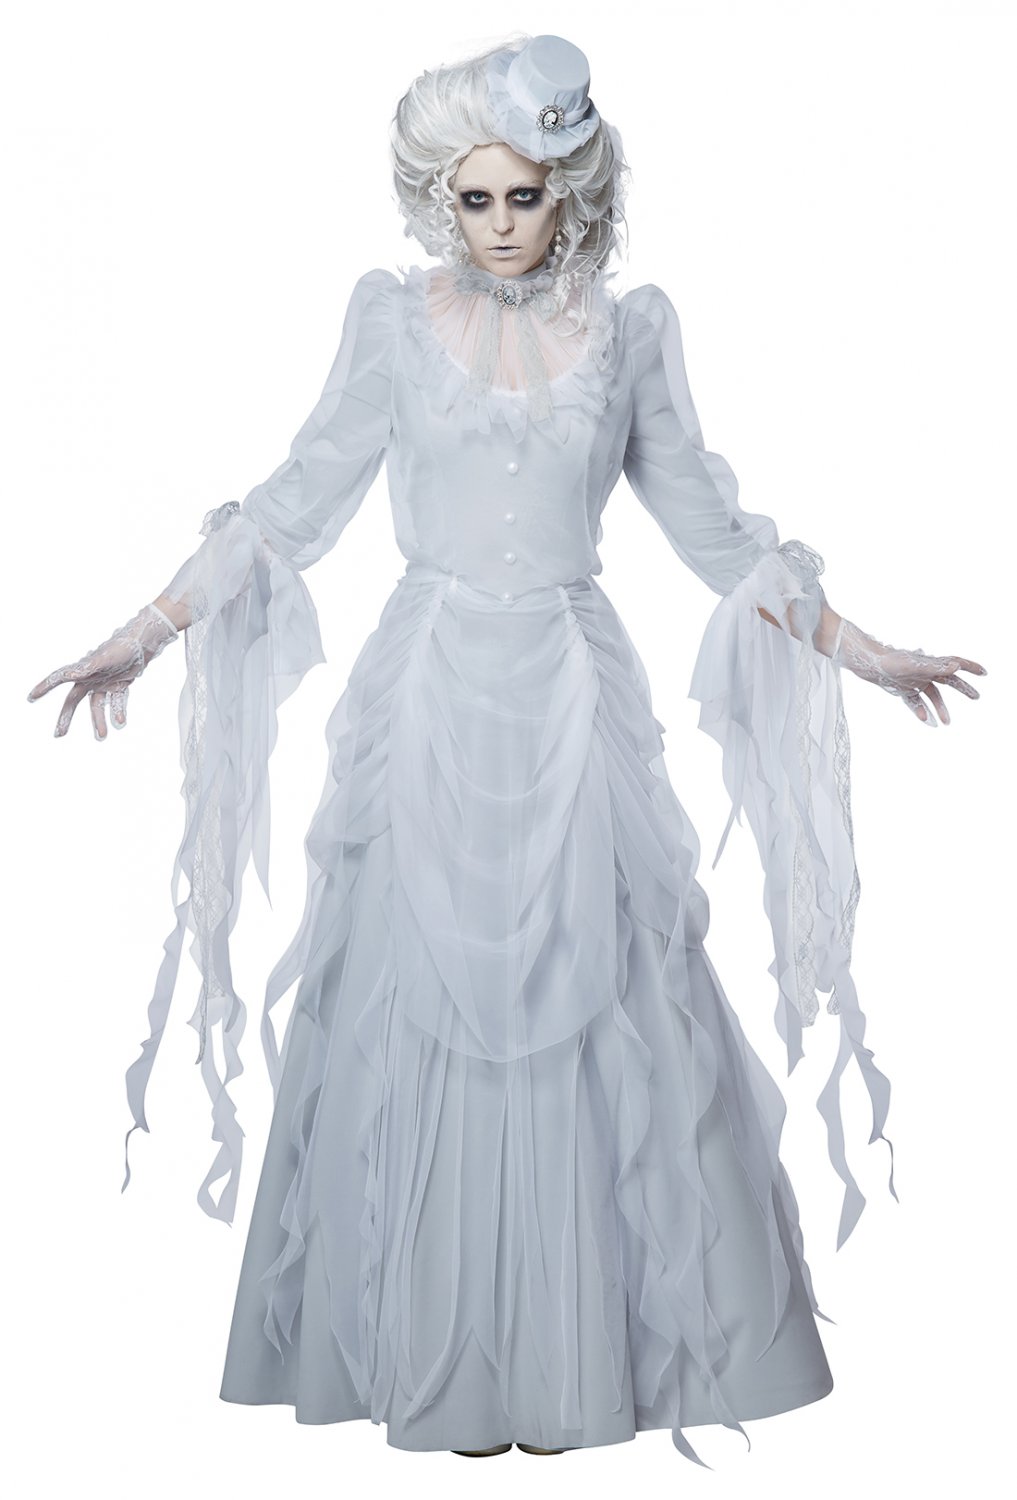 Size: Large #01474 Gothic Haunting Lady Ghostly Bride Adult Costume